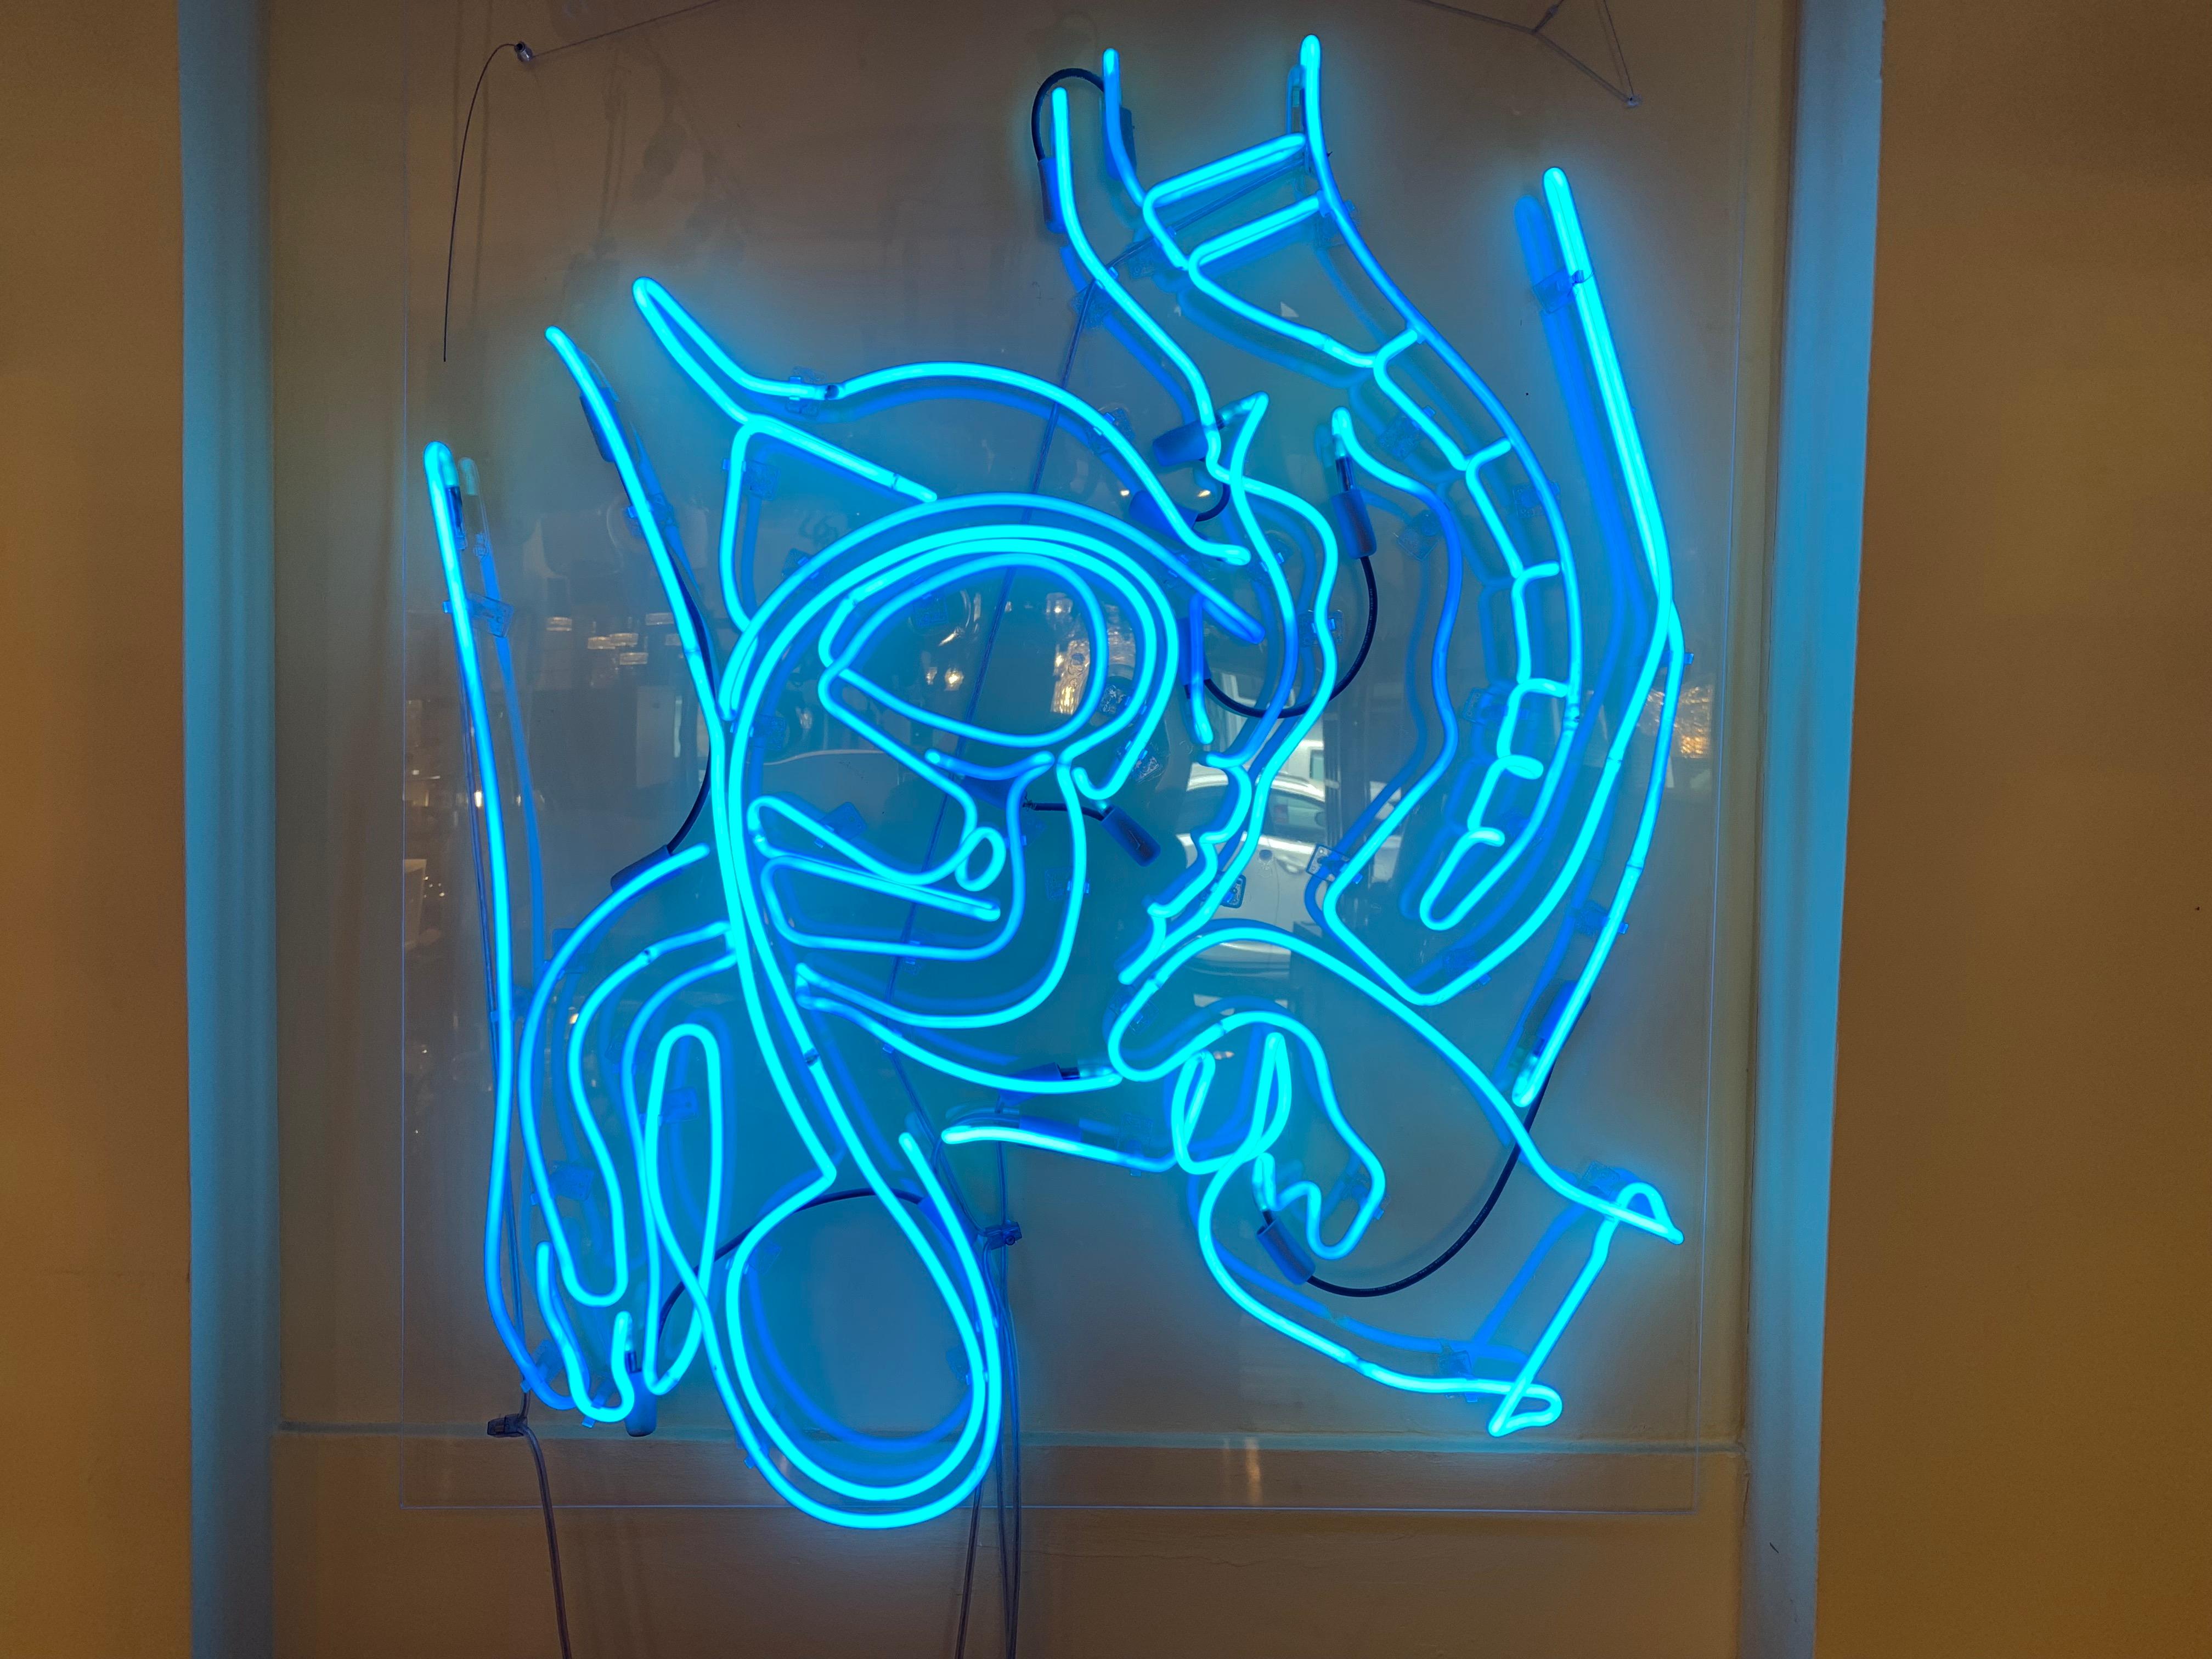 A rather unusual large vintage blue neon by artist Anthony James. The neon depicts a cross-section of a prostate examination. Bought by the late Laurence Isaacson at auction in New York in 2005.

Anthony James is a British/ American artist based